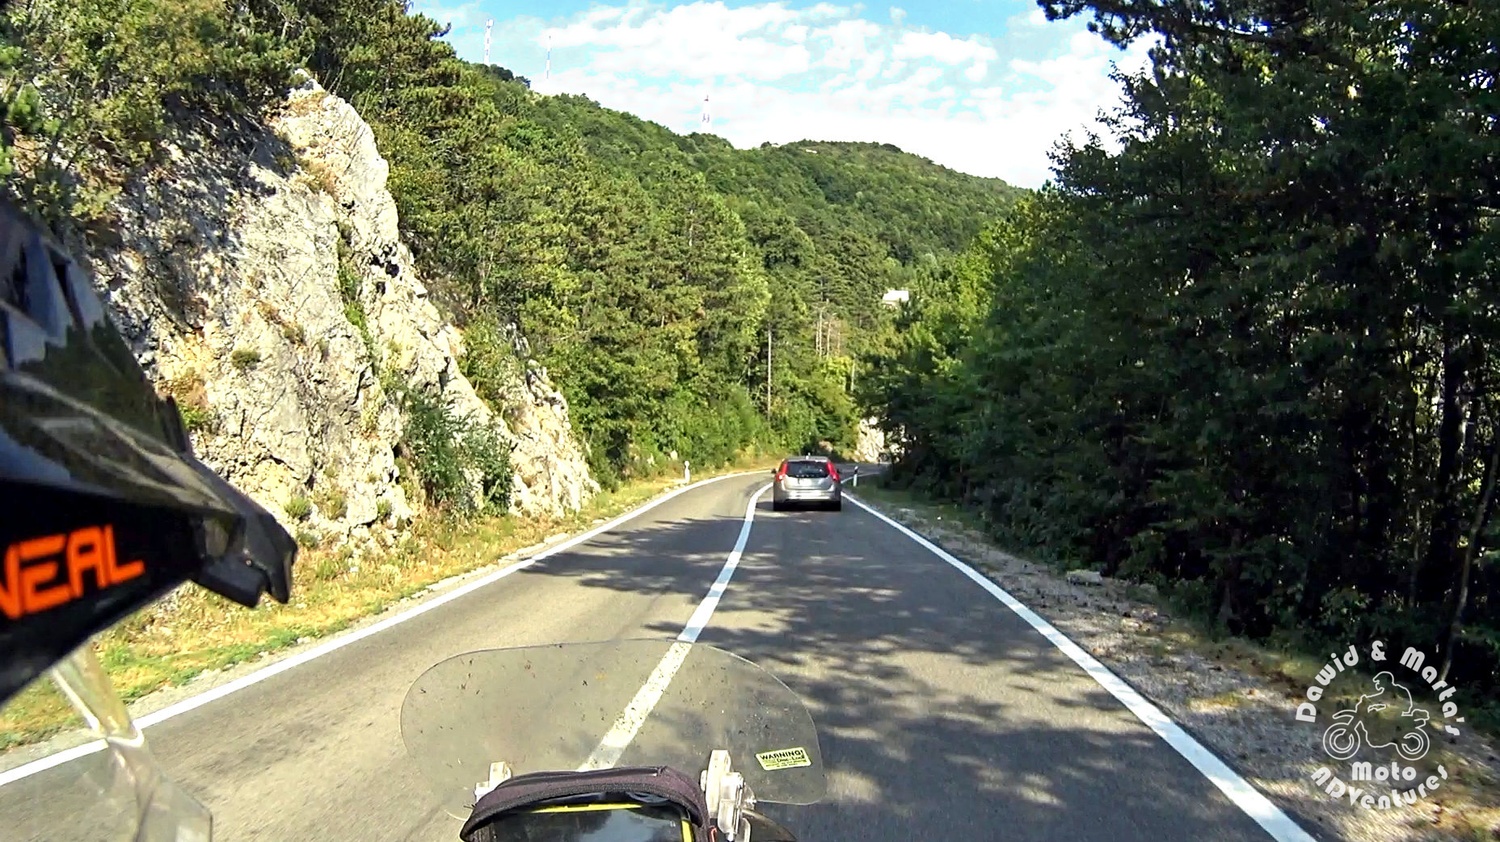 The Croatia road 23 is tightly surrounded by forests and mountains